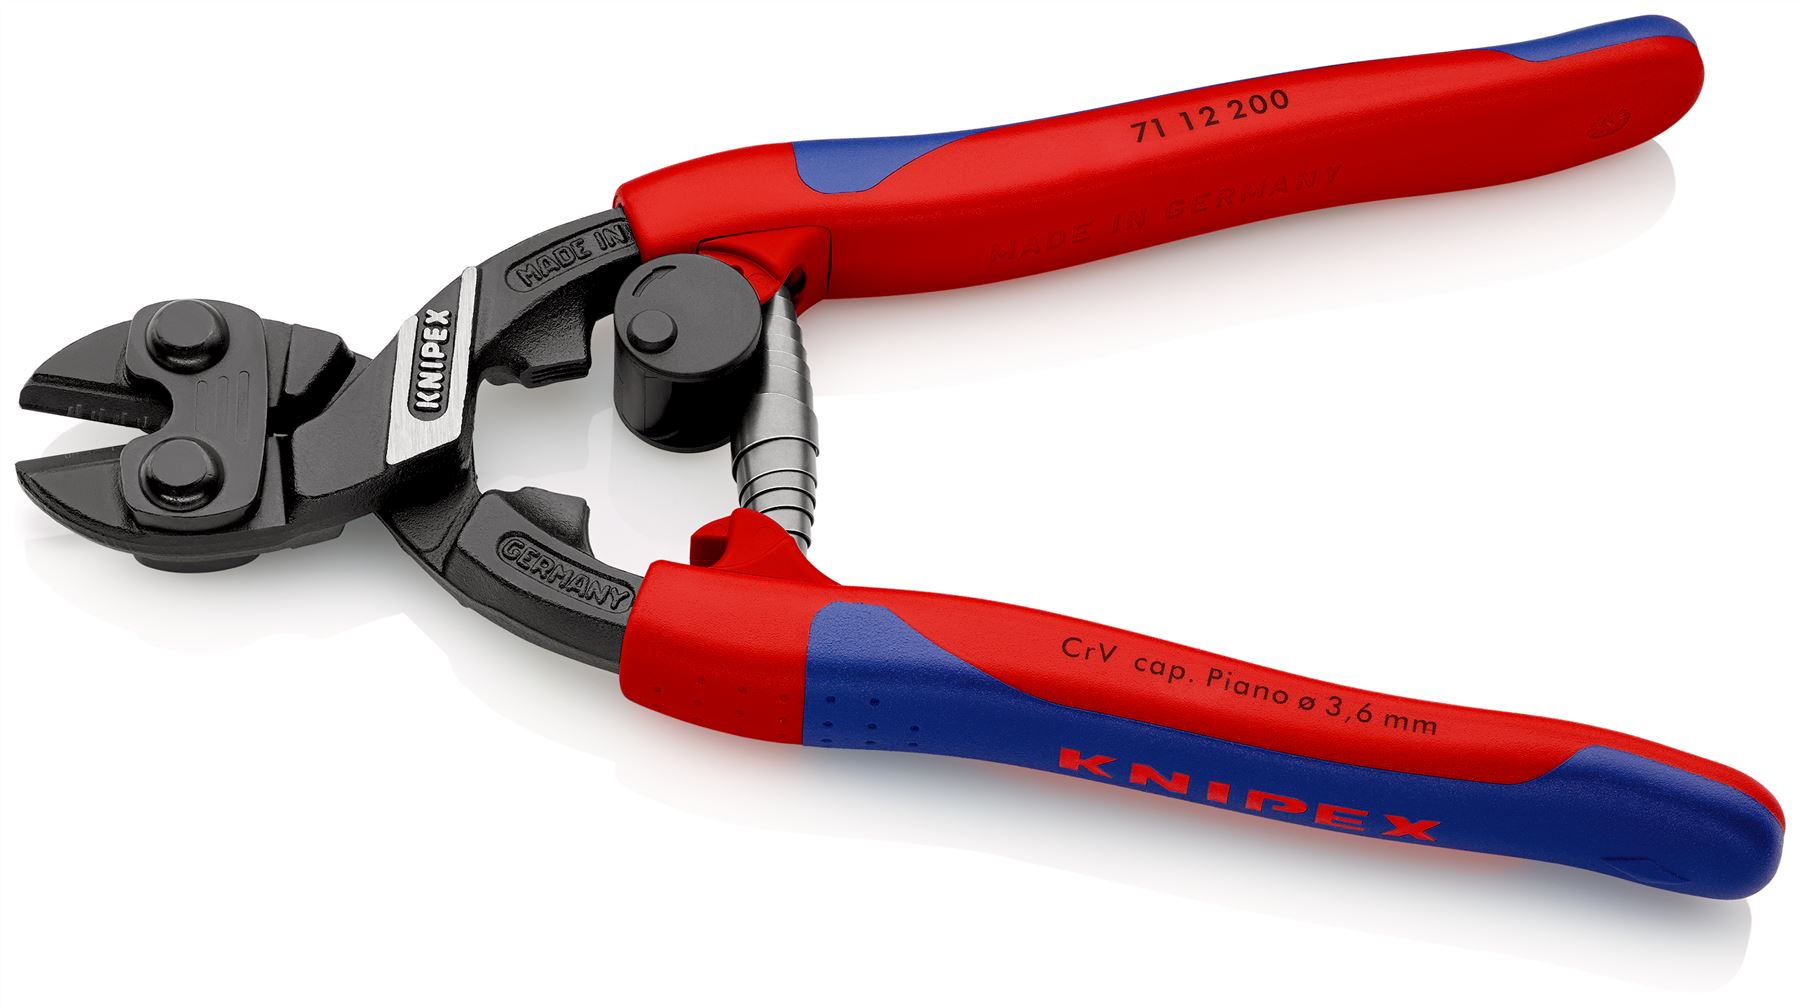 KNIPEX Compact Bolt Cutters CoBolt Cutting Pliers 200mm Multi Component Grips 71 12 200 SB